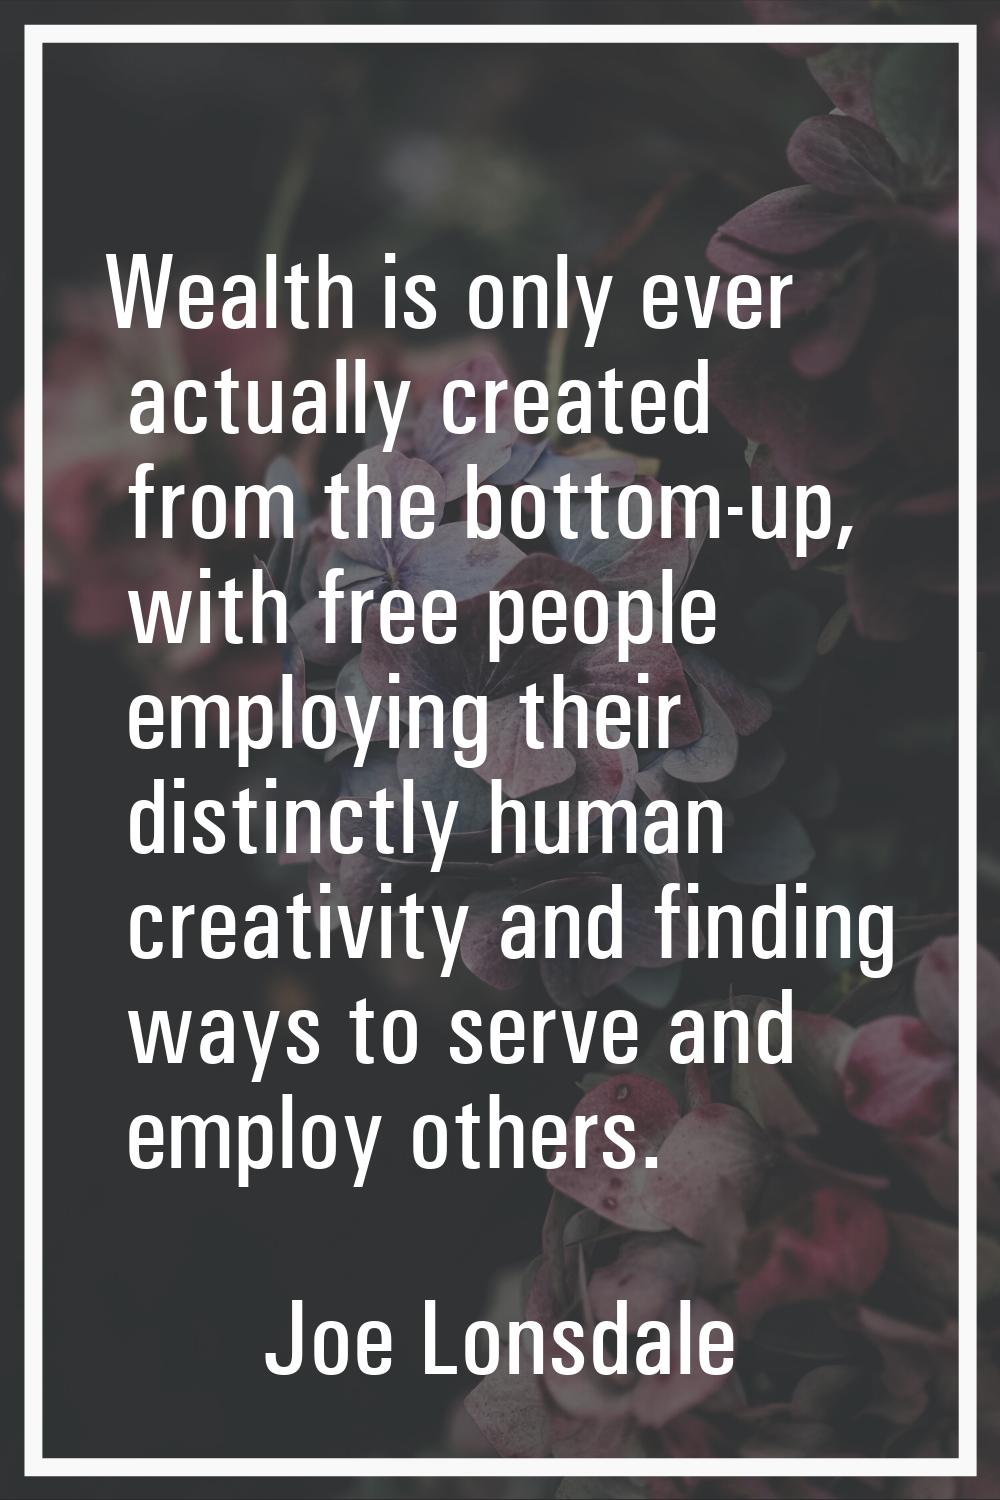 Wealth is only ever actually created from the bottom-up, with free people employing their distinctl